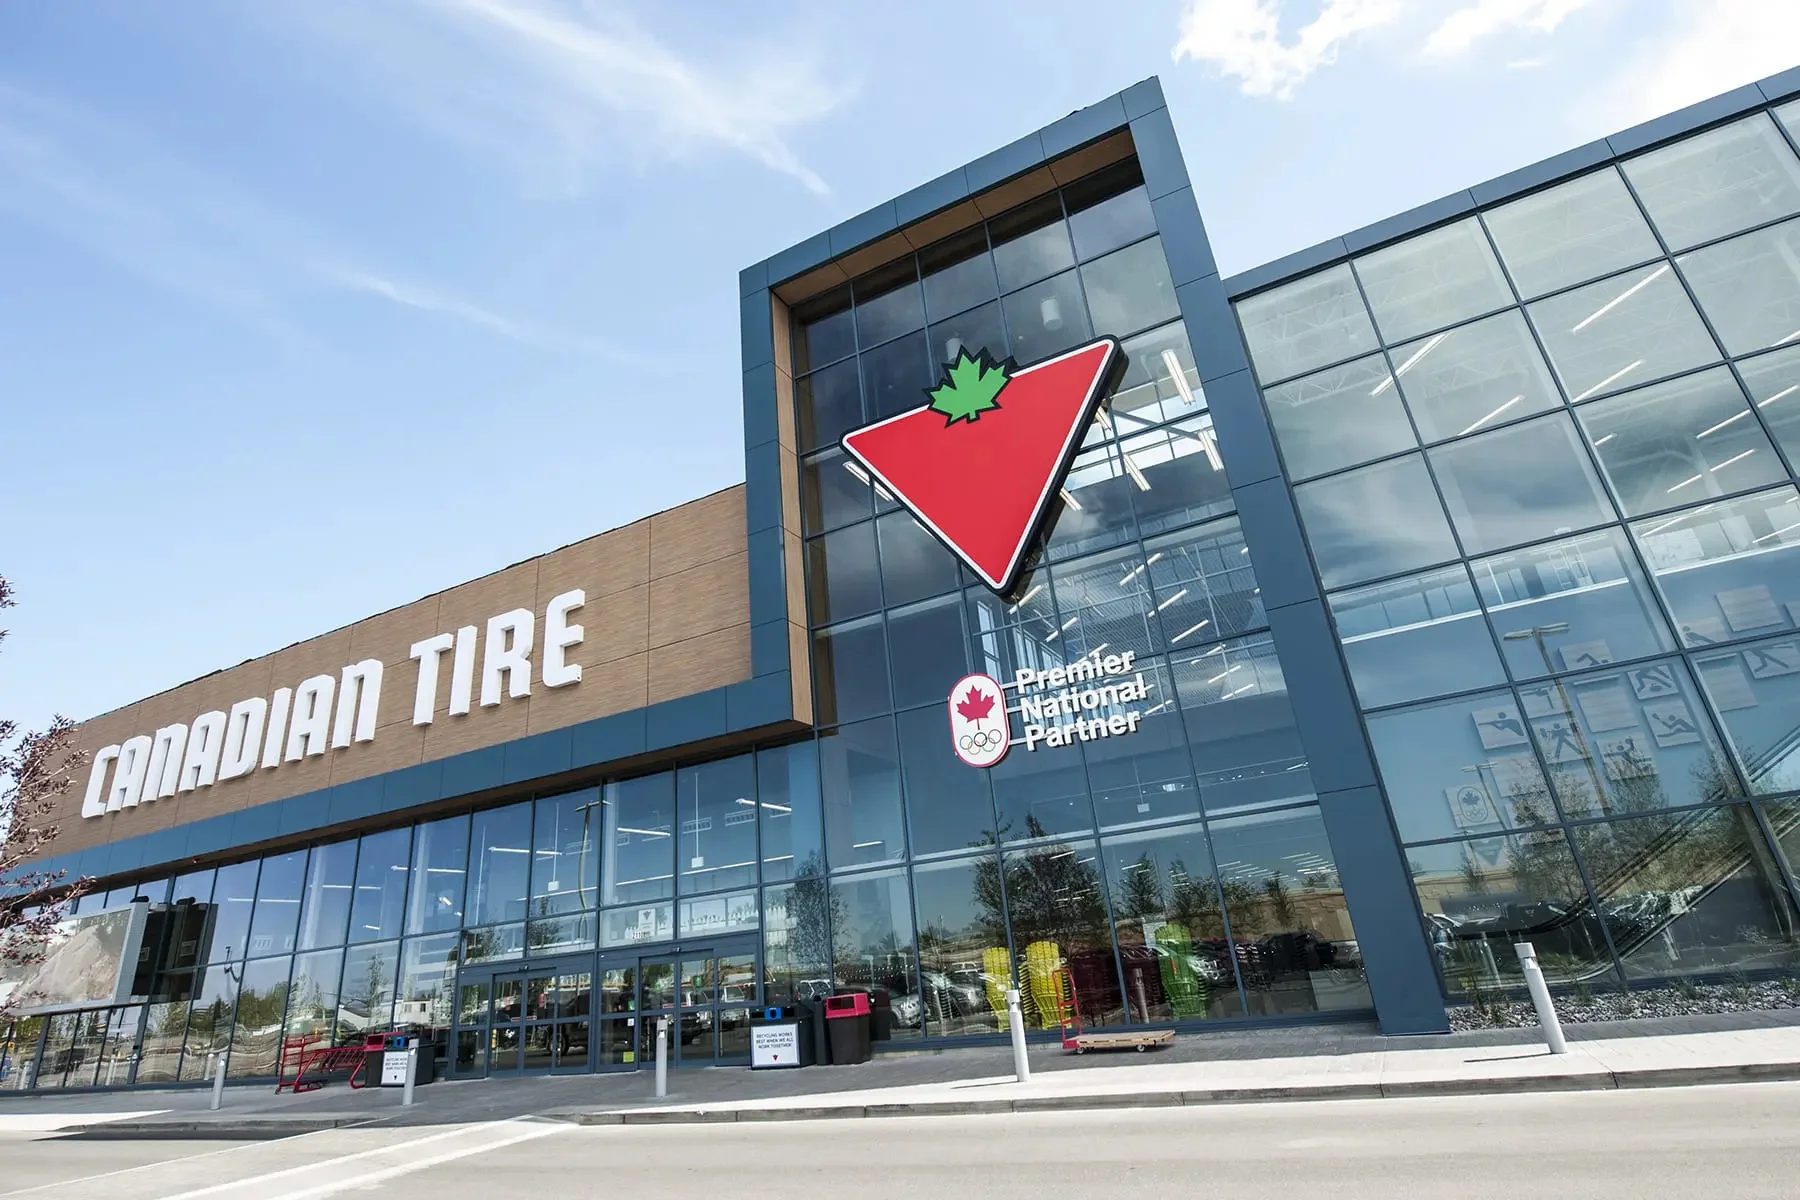 Canadian Tire Corporation (CTC) committed to ensuring safe business practices